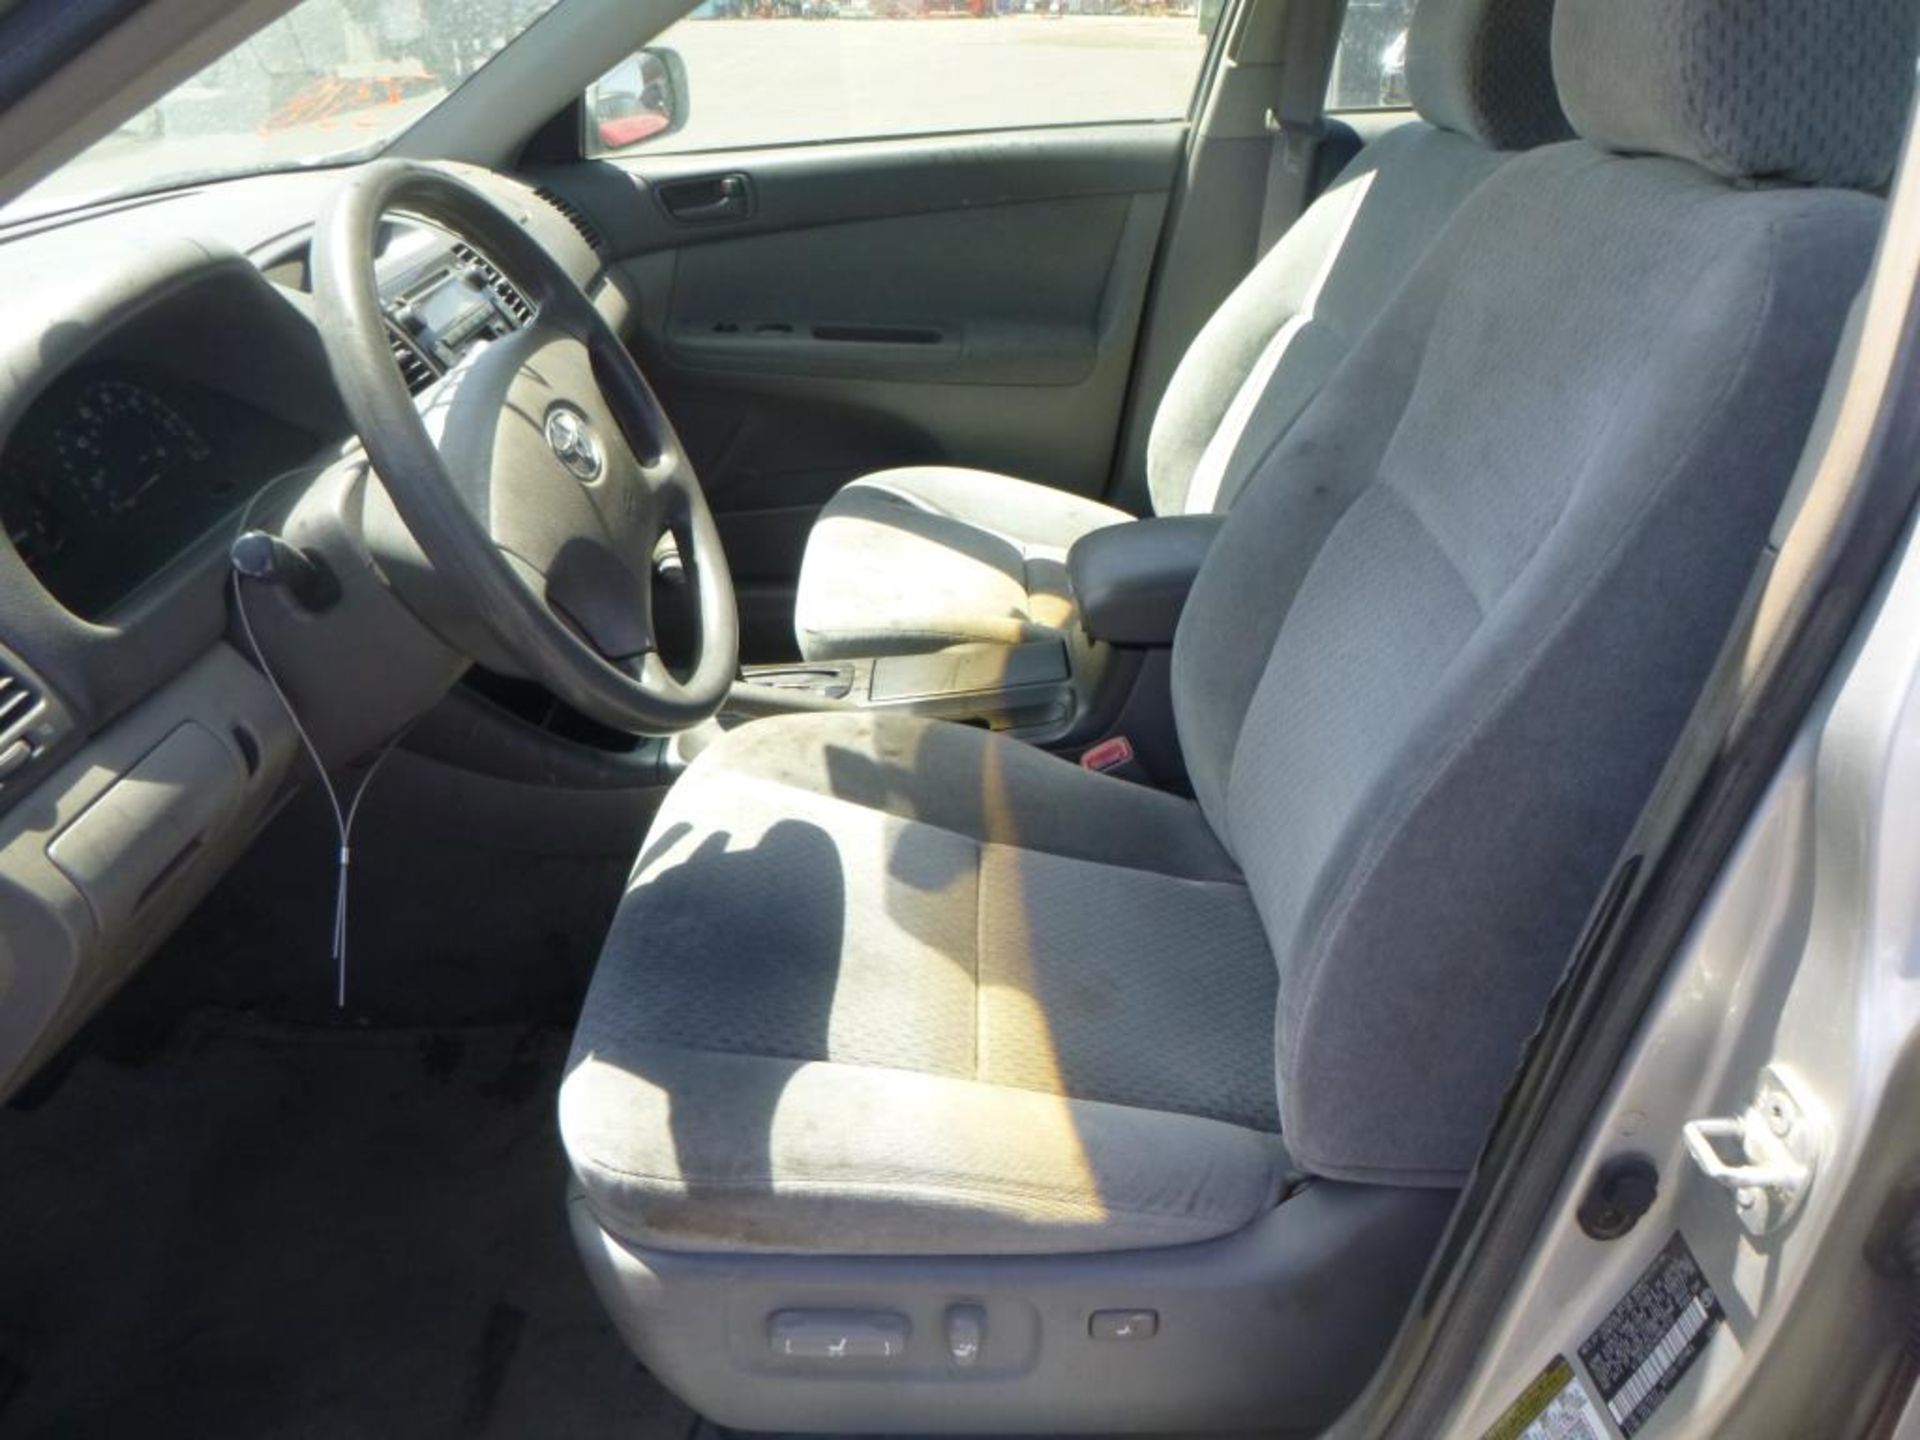 2004 Toyota Camry - Image 10 of 13